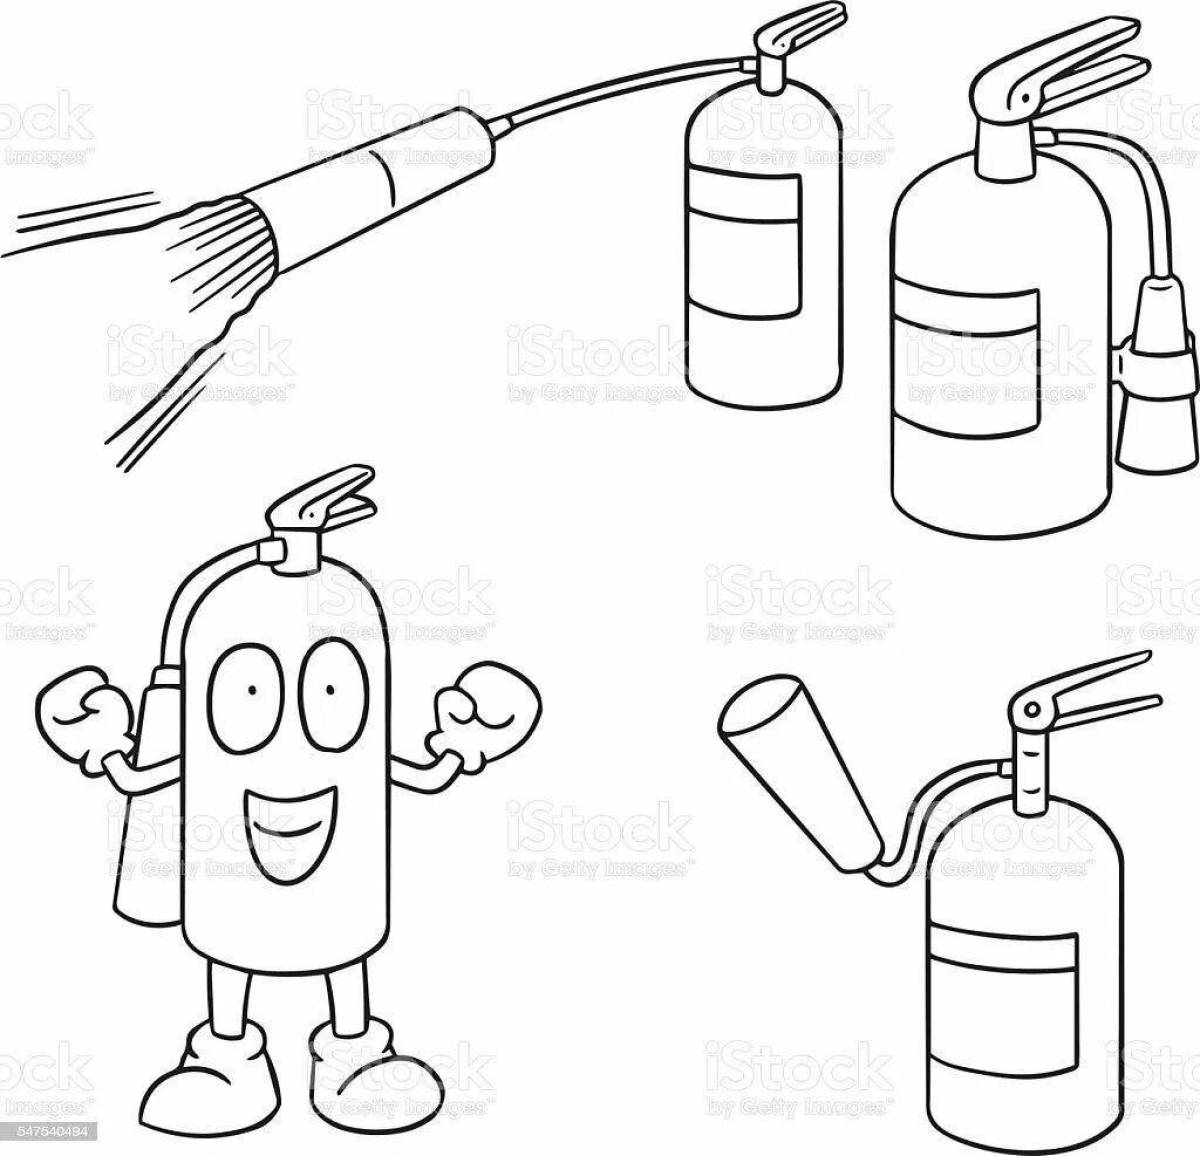 Colorful fire extinguisher coloring book for 3-4 year olds